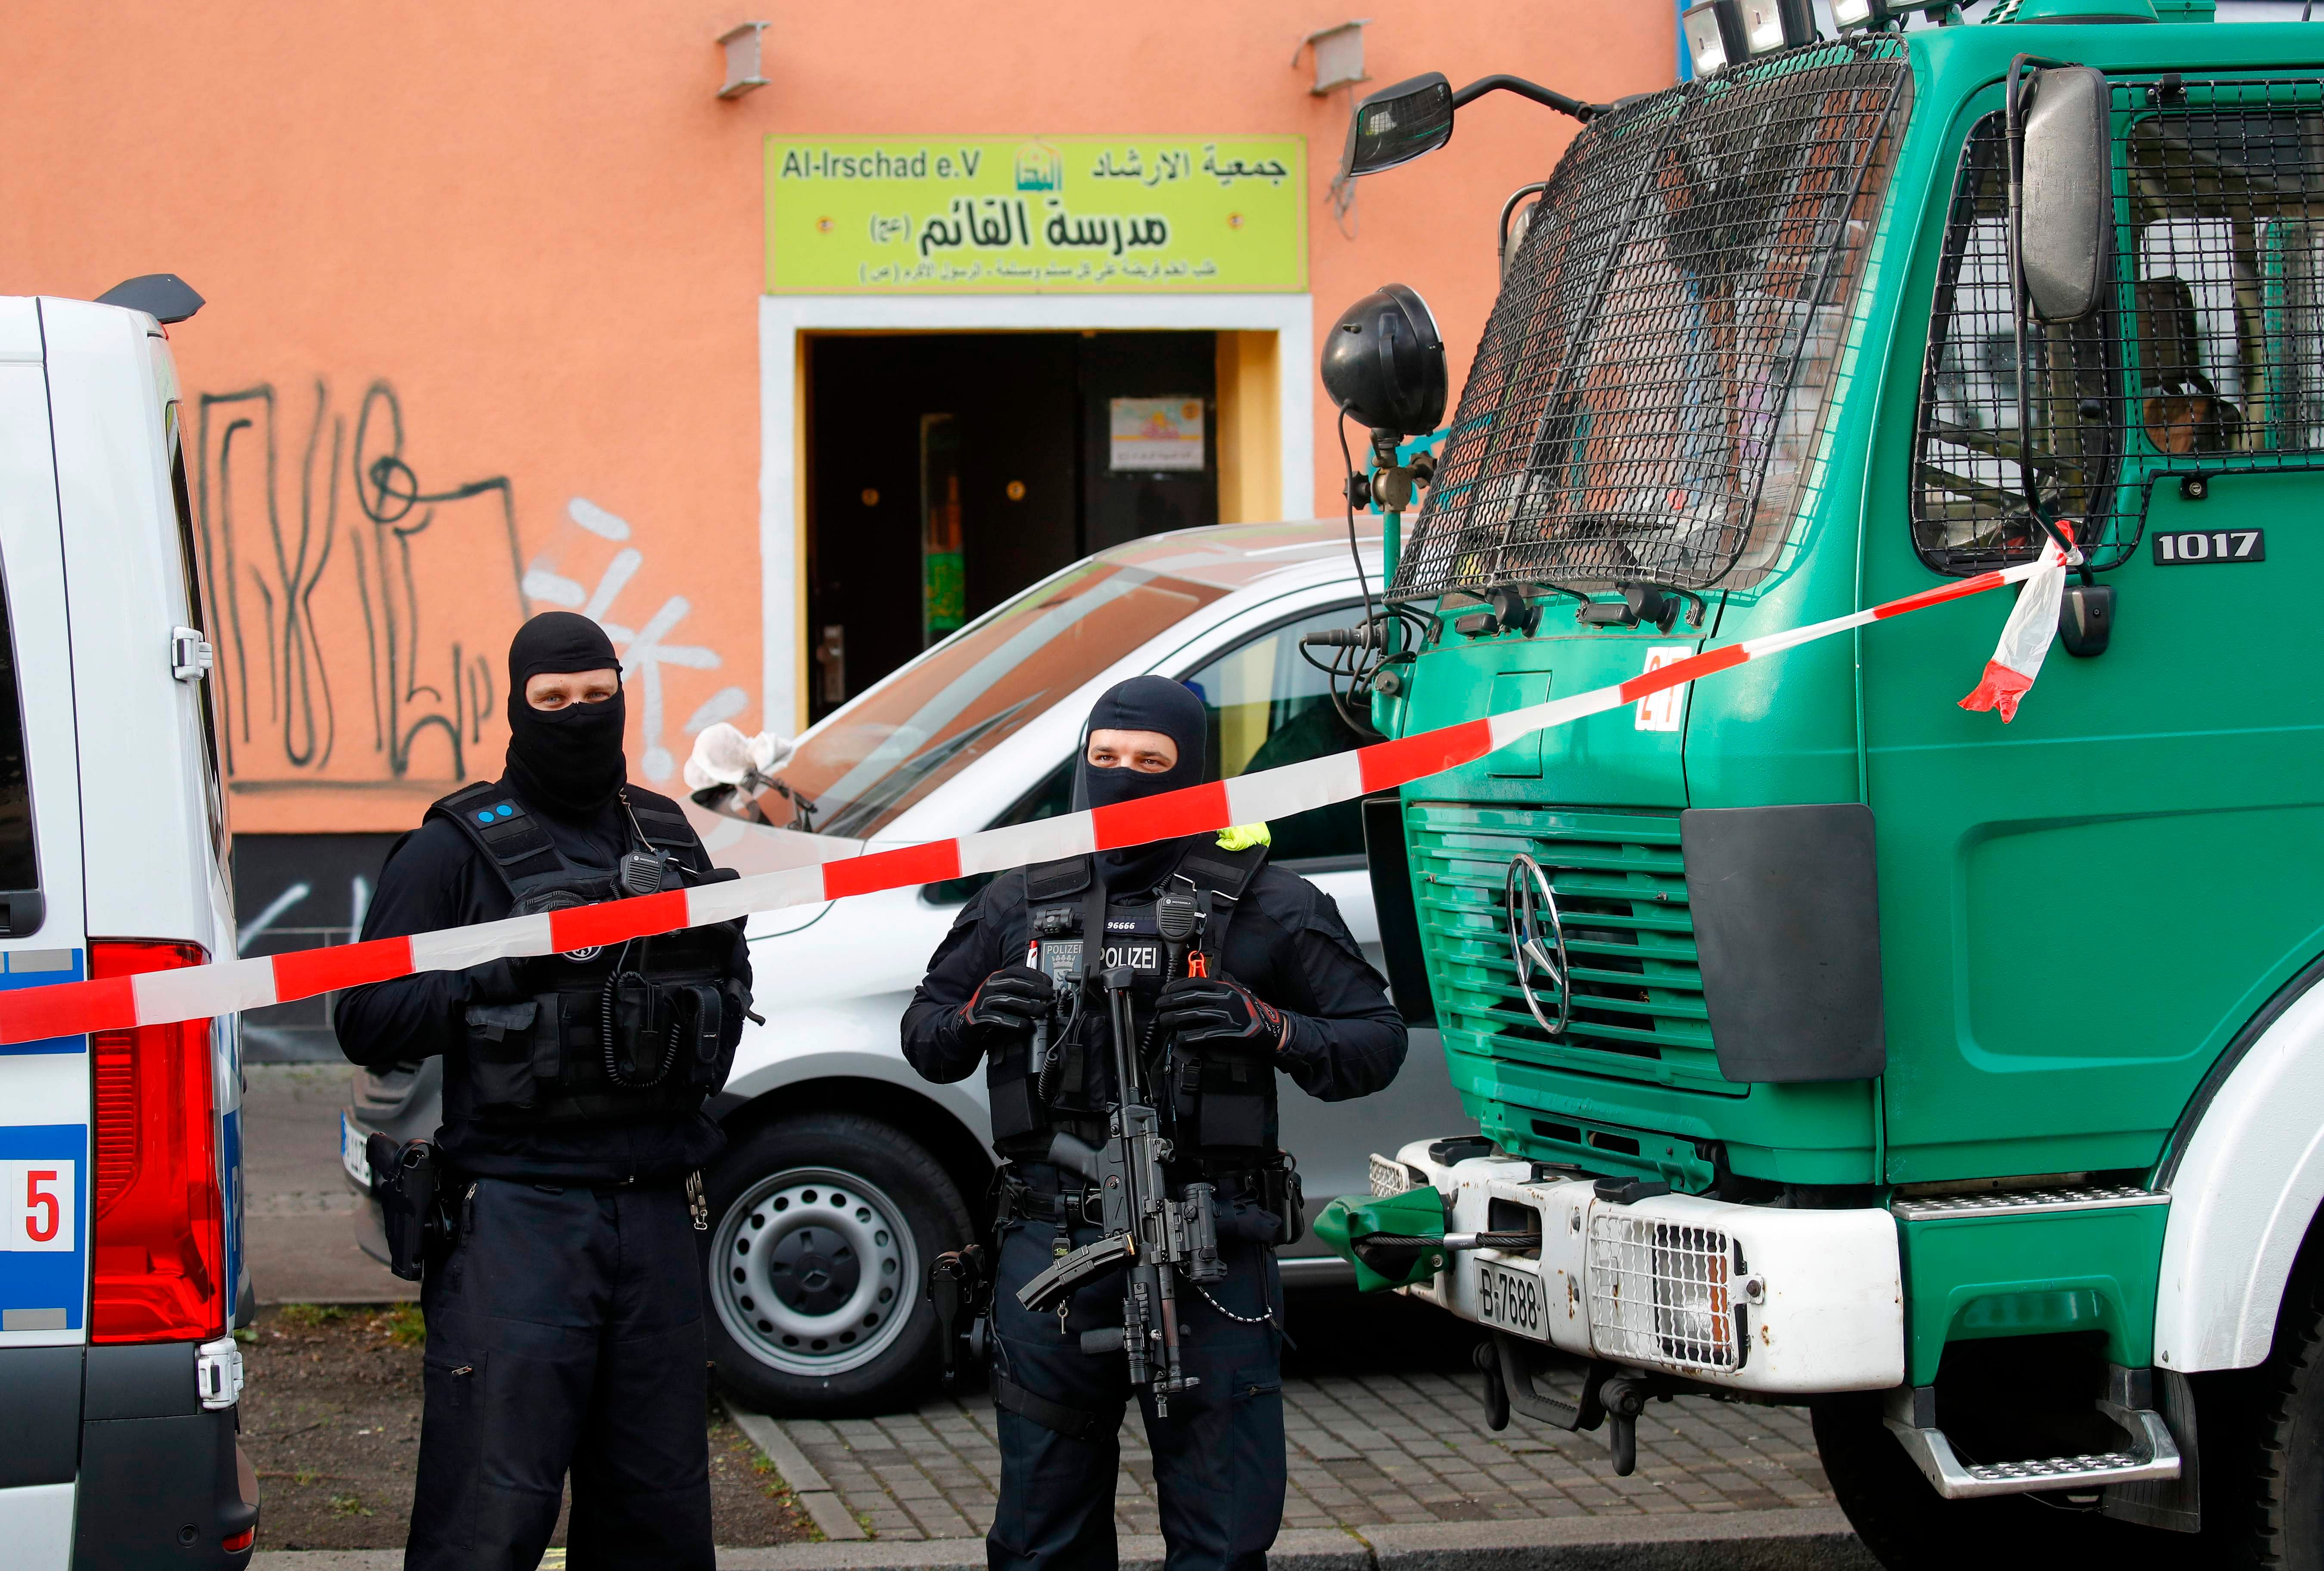 Poilice stand in front of Al-Irschad Mosque during a raid on April 30, 2020 in Berlin, after dozens of police and special forces stormed mosques and associations linked to Hezbollah in Bremen, Berlin. (AFP Photo)